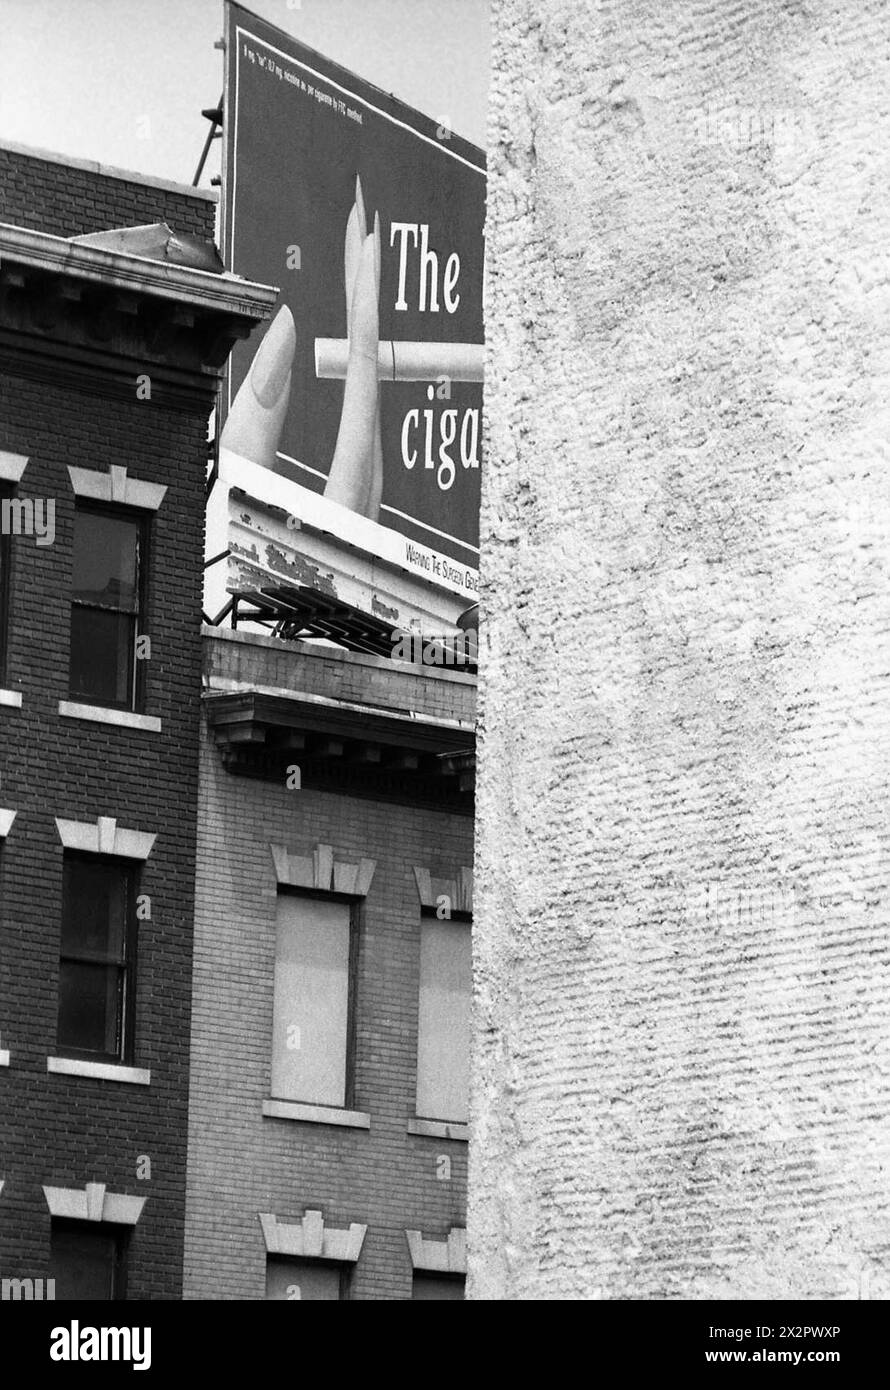 Connecticut, U.S.A., 1982. Old brick buildings in the city with a large billboard on a roof  promoting a cigarette brand. Stock Photo